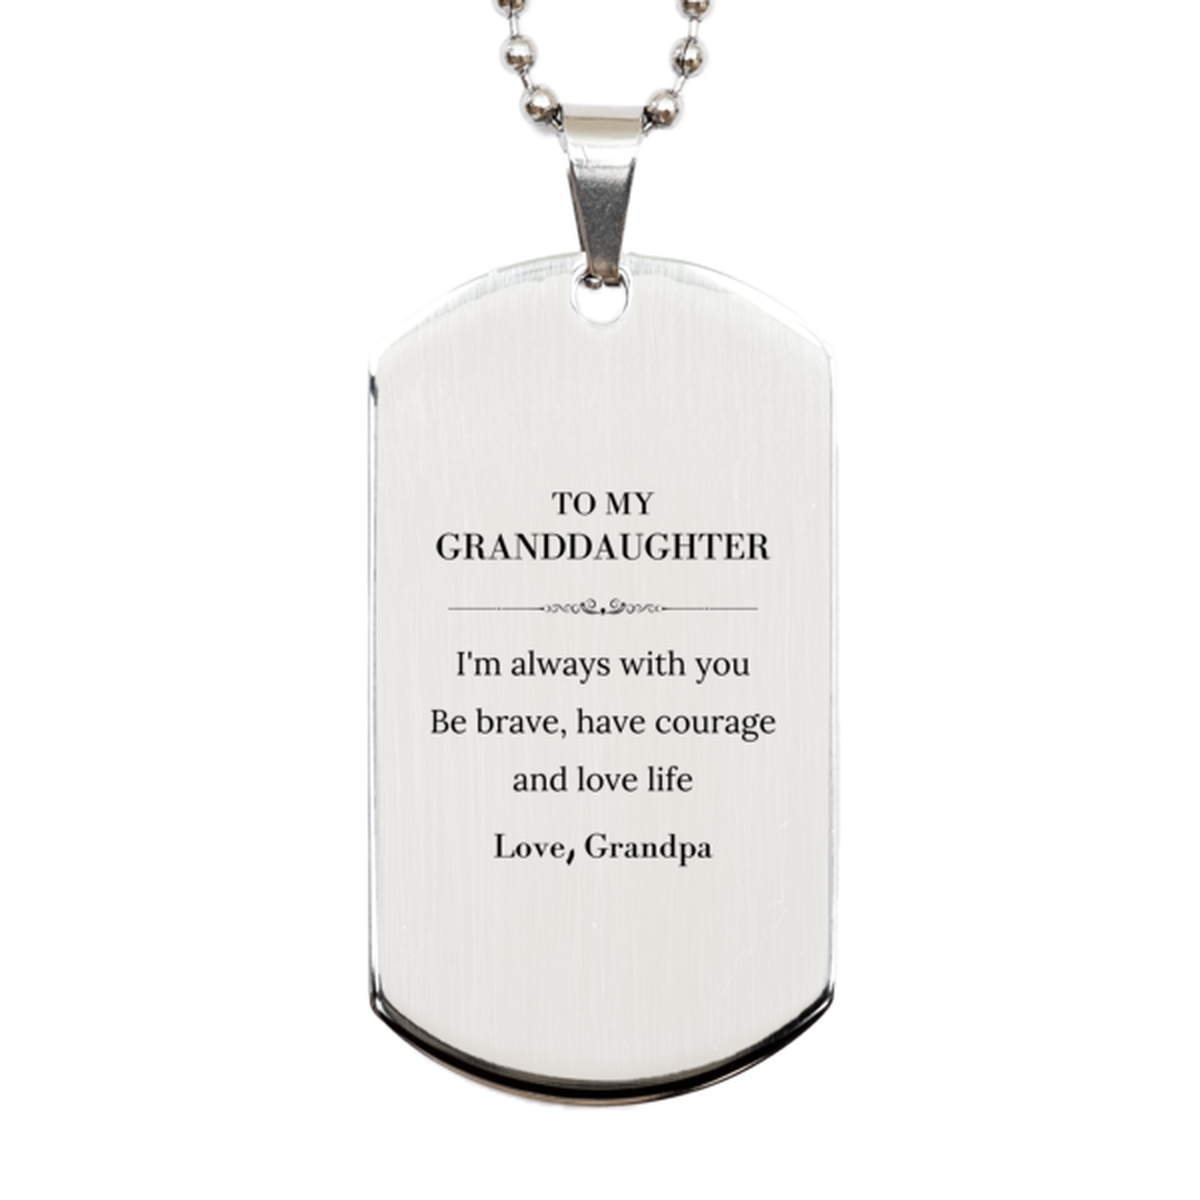 To My Granddaughter Gifts from Grandpa, Unique Silver Dog Tag Inspirational Christmas Birthday Graduation Gifts for Granddaughter I'm always with you. Be brave, have courage and love life. Love, Grandpa